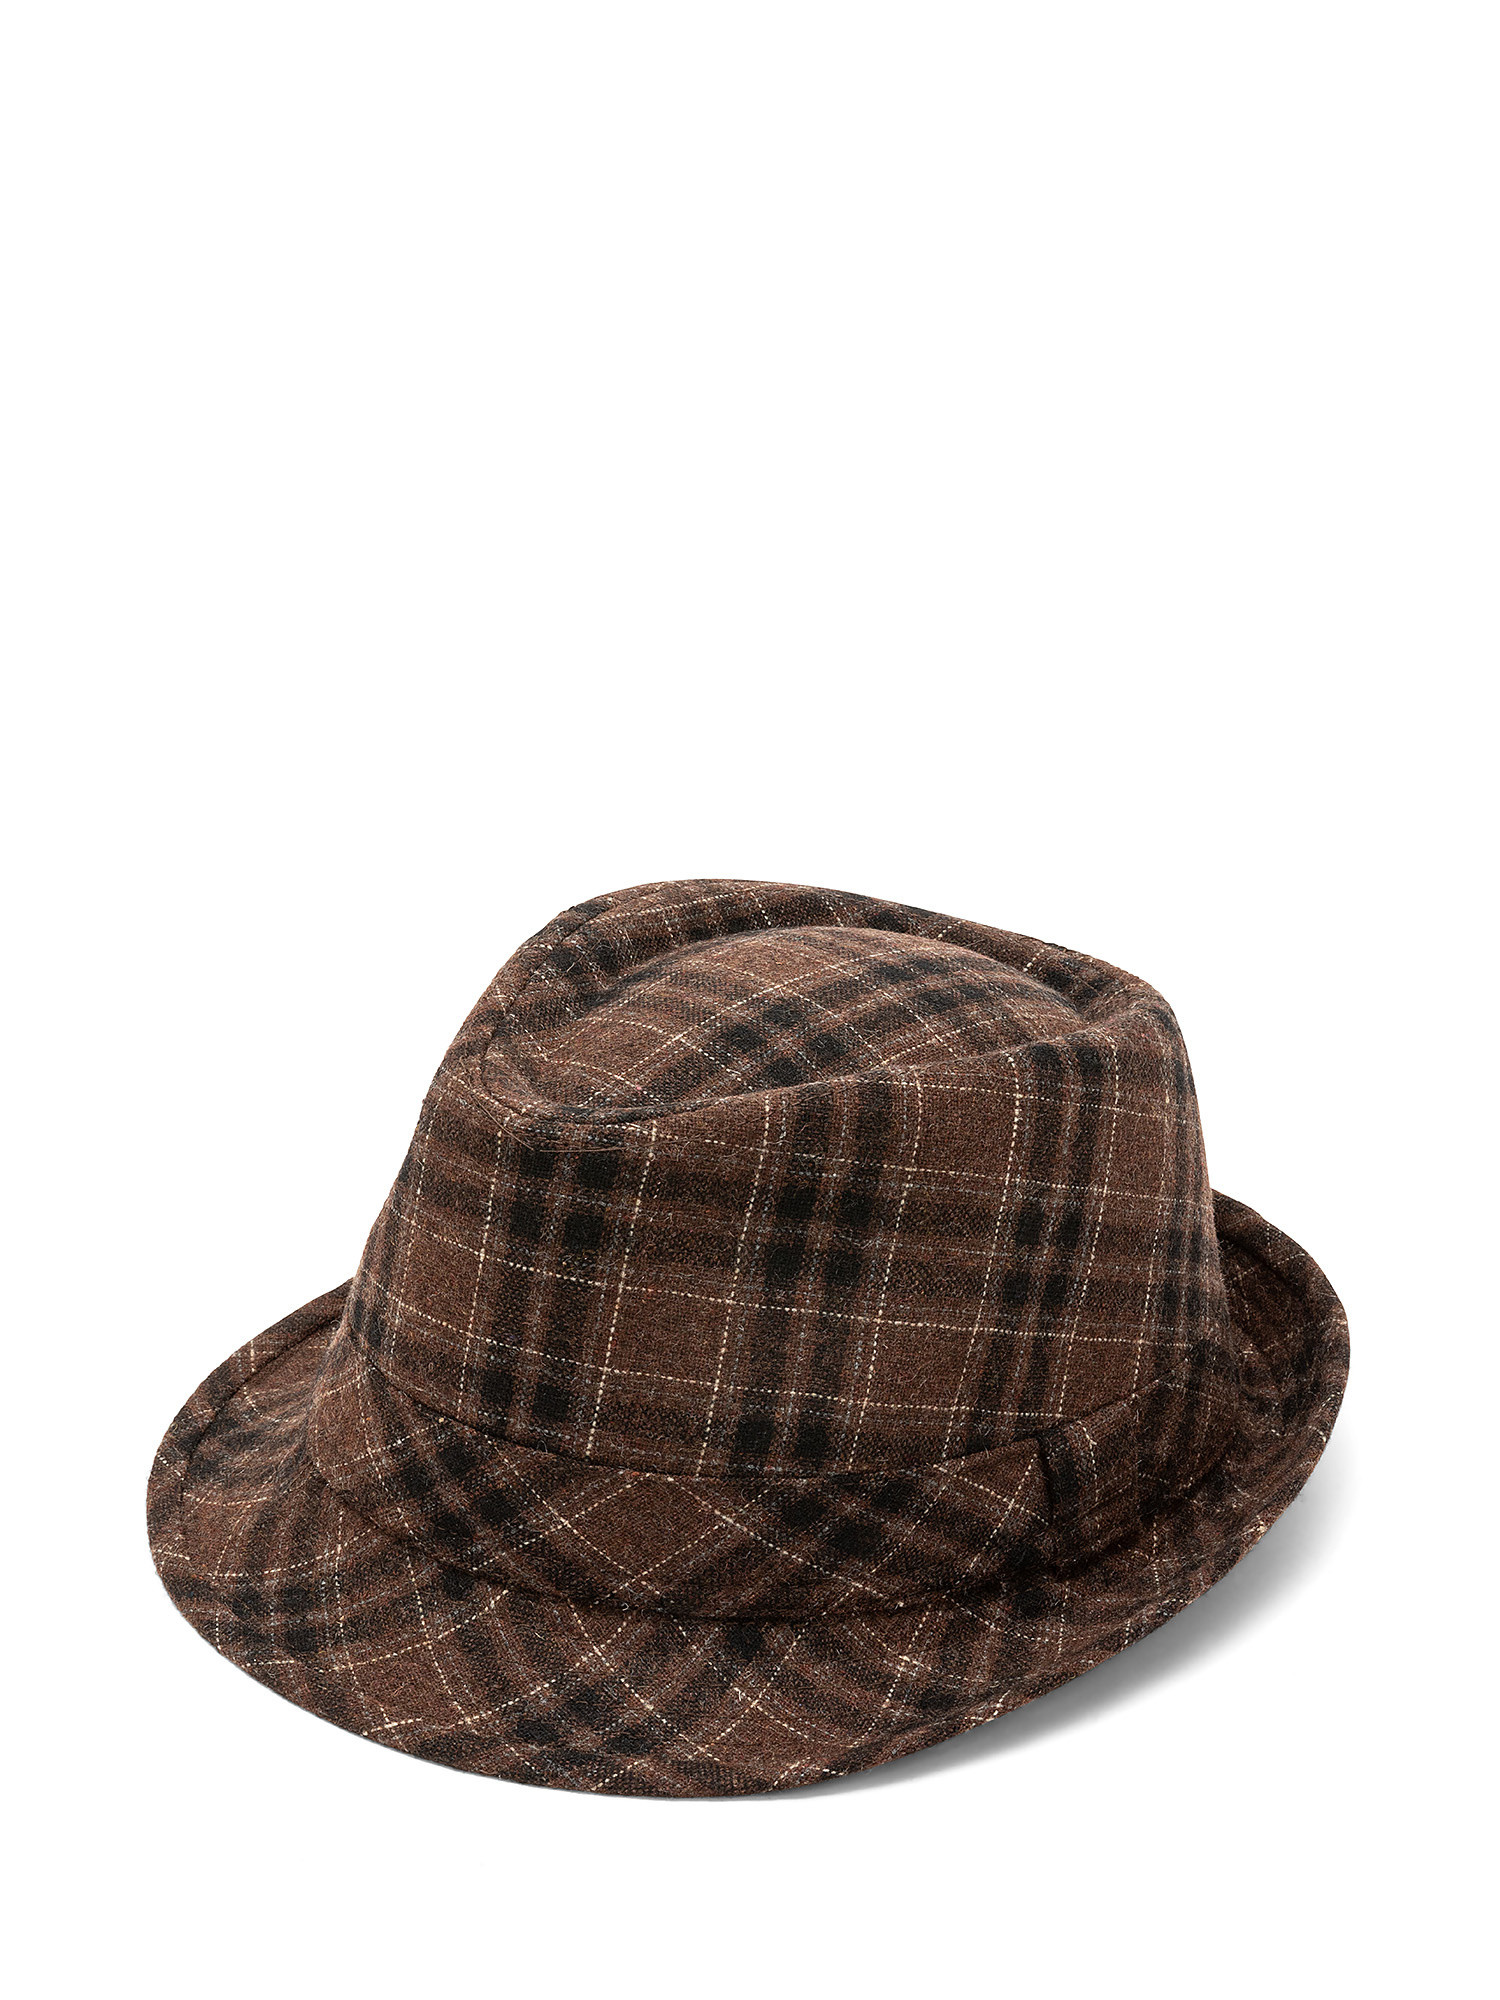 Alpinetto hat, Brown, large image number 0